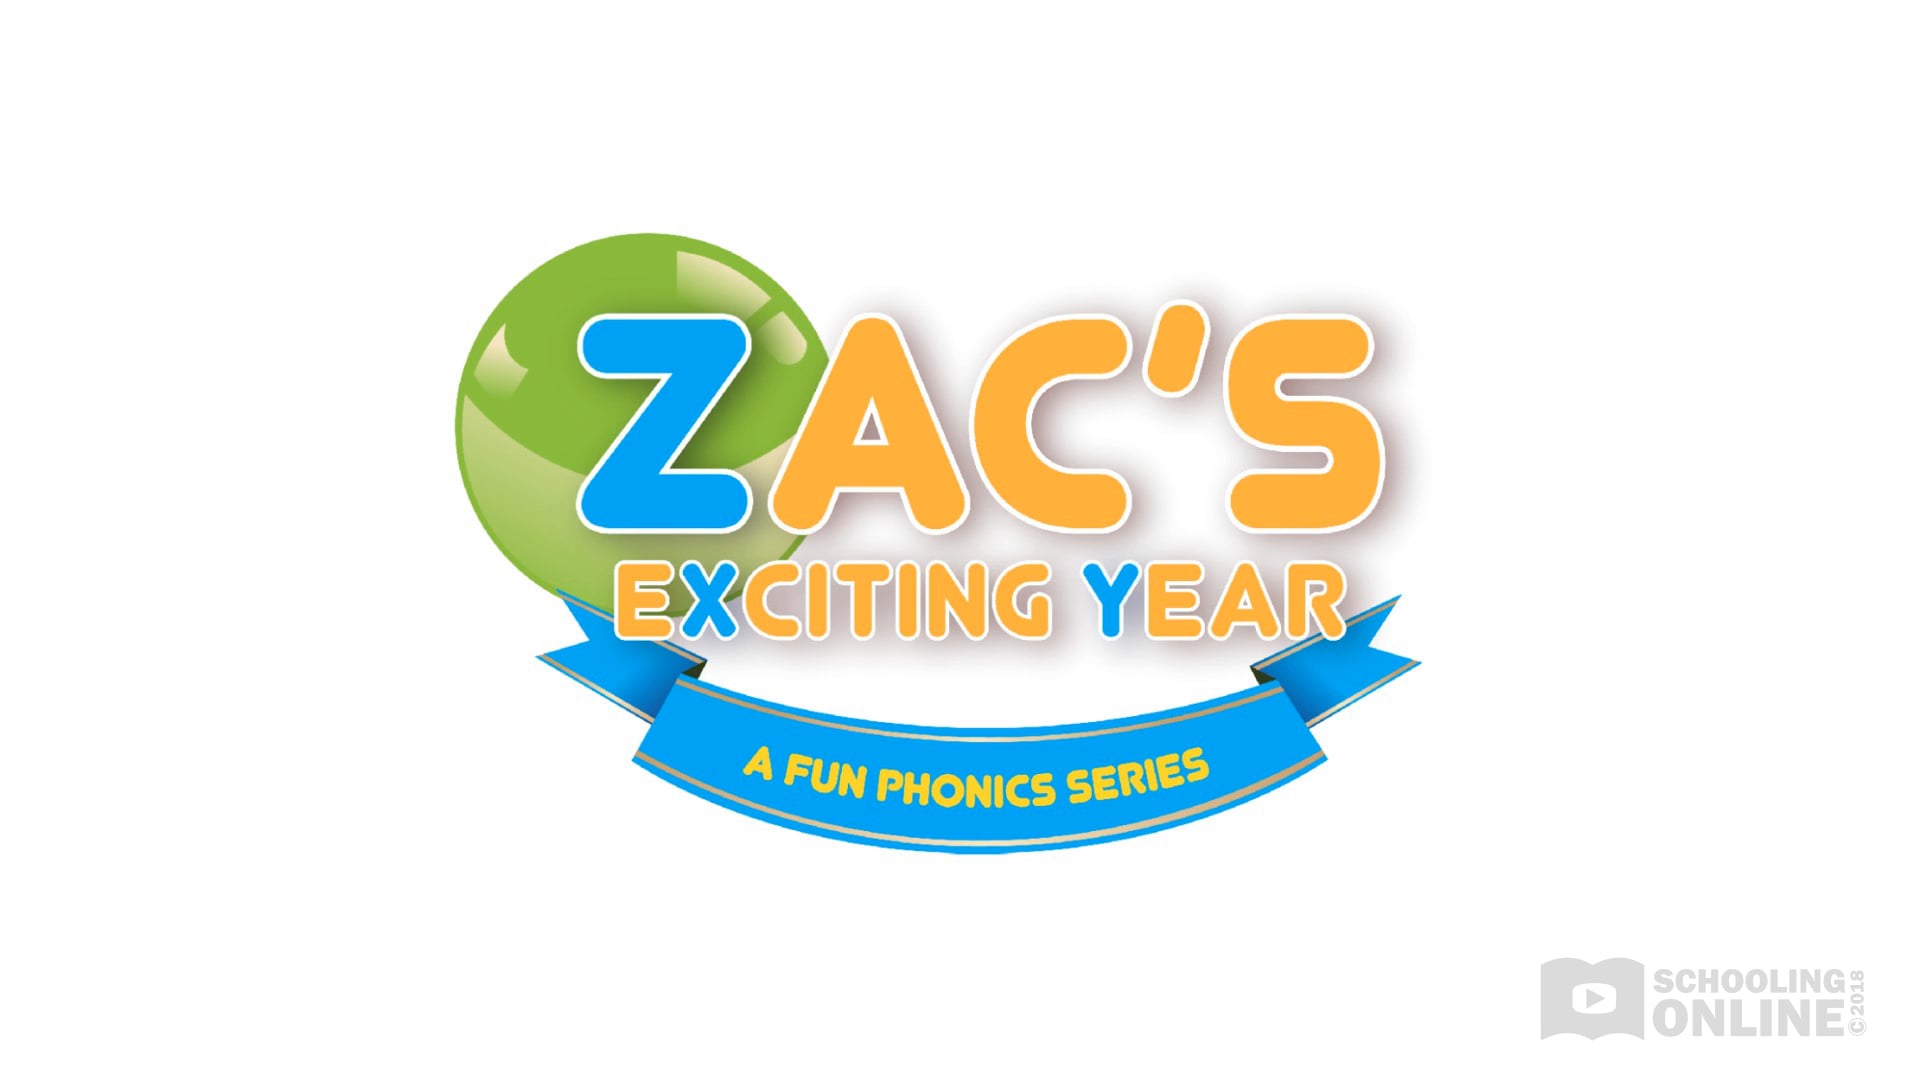 Zac's Exciting Year